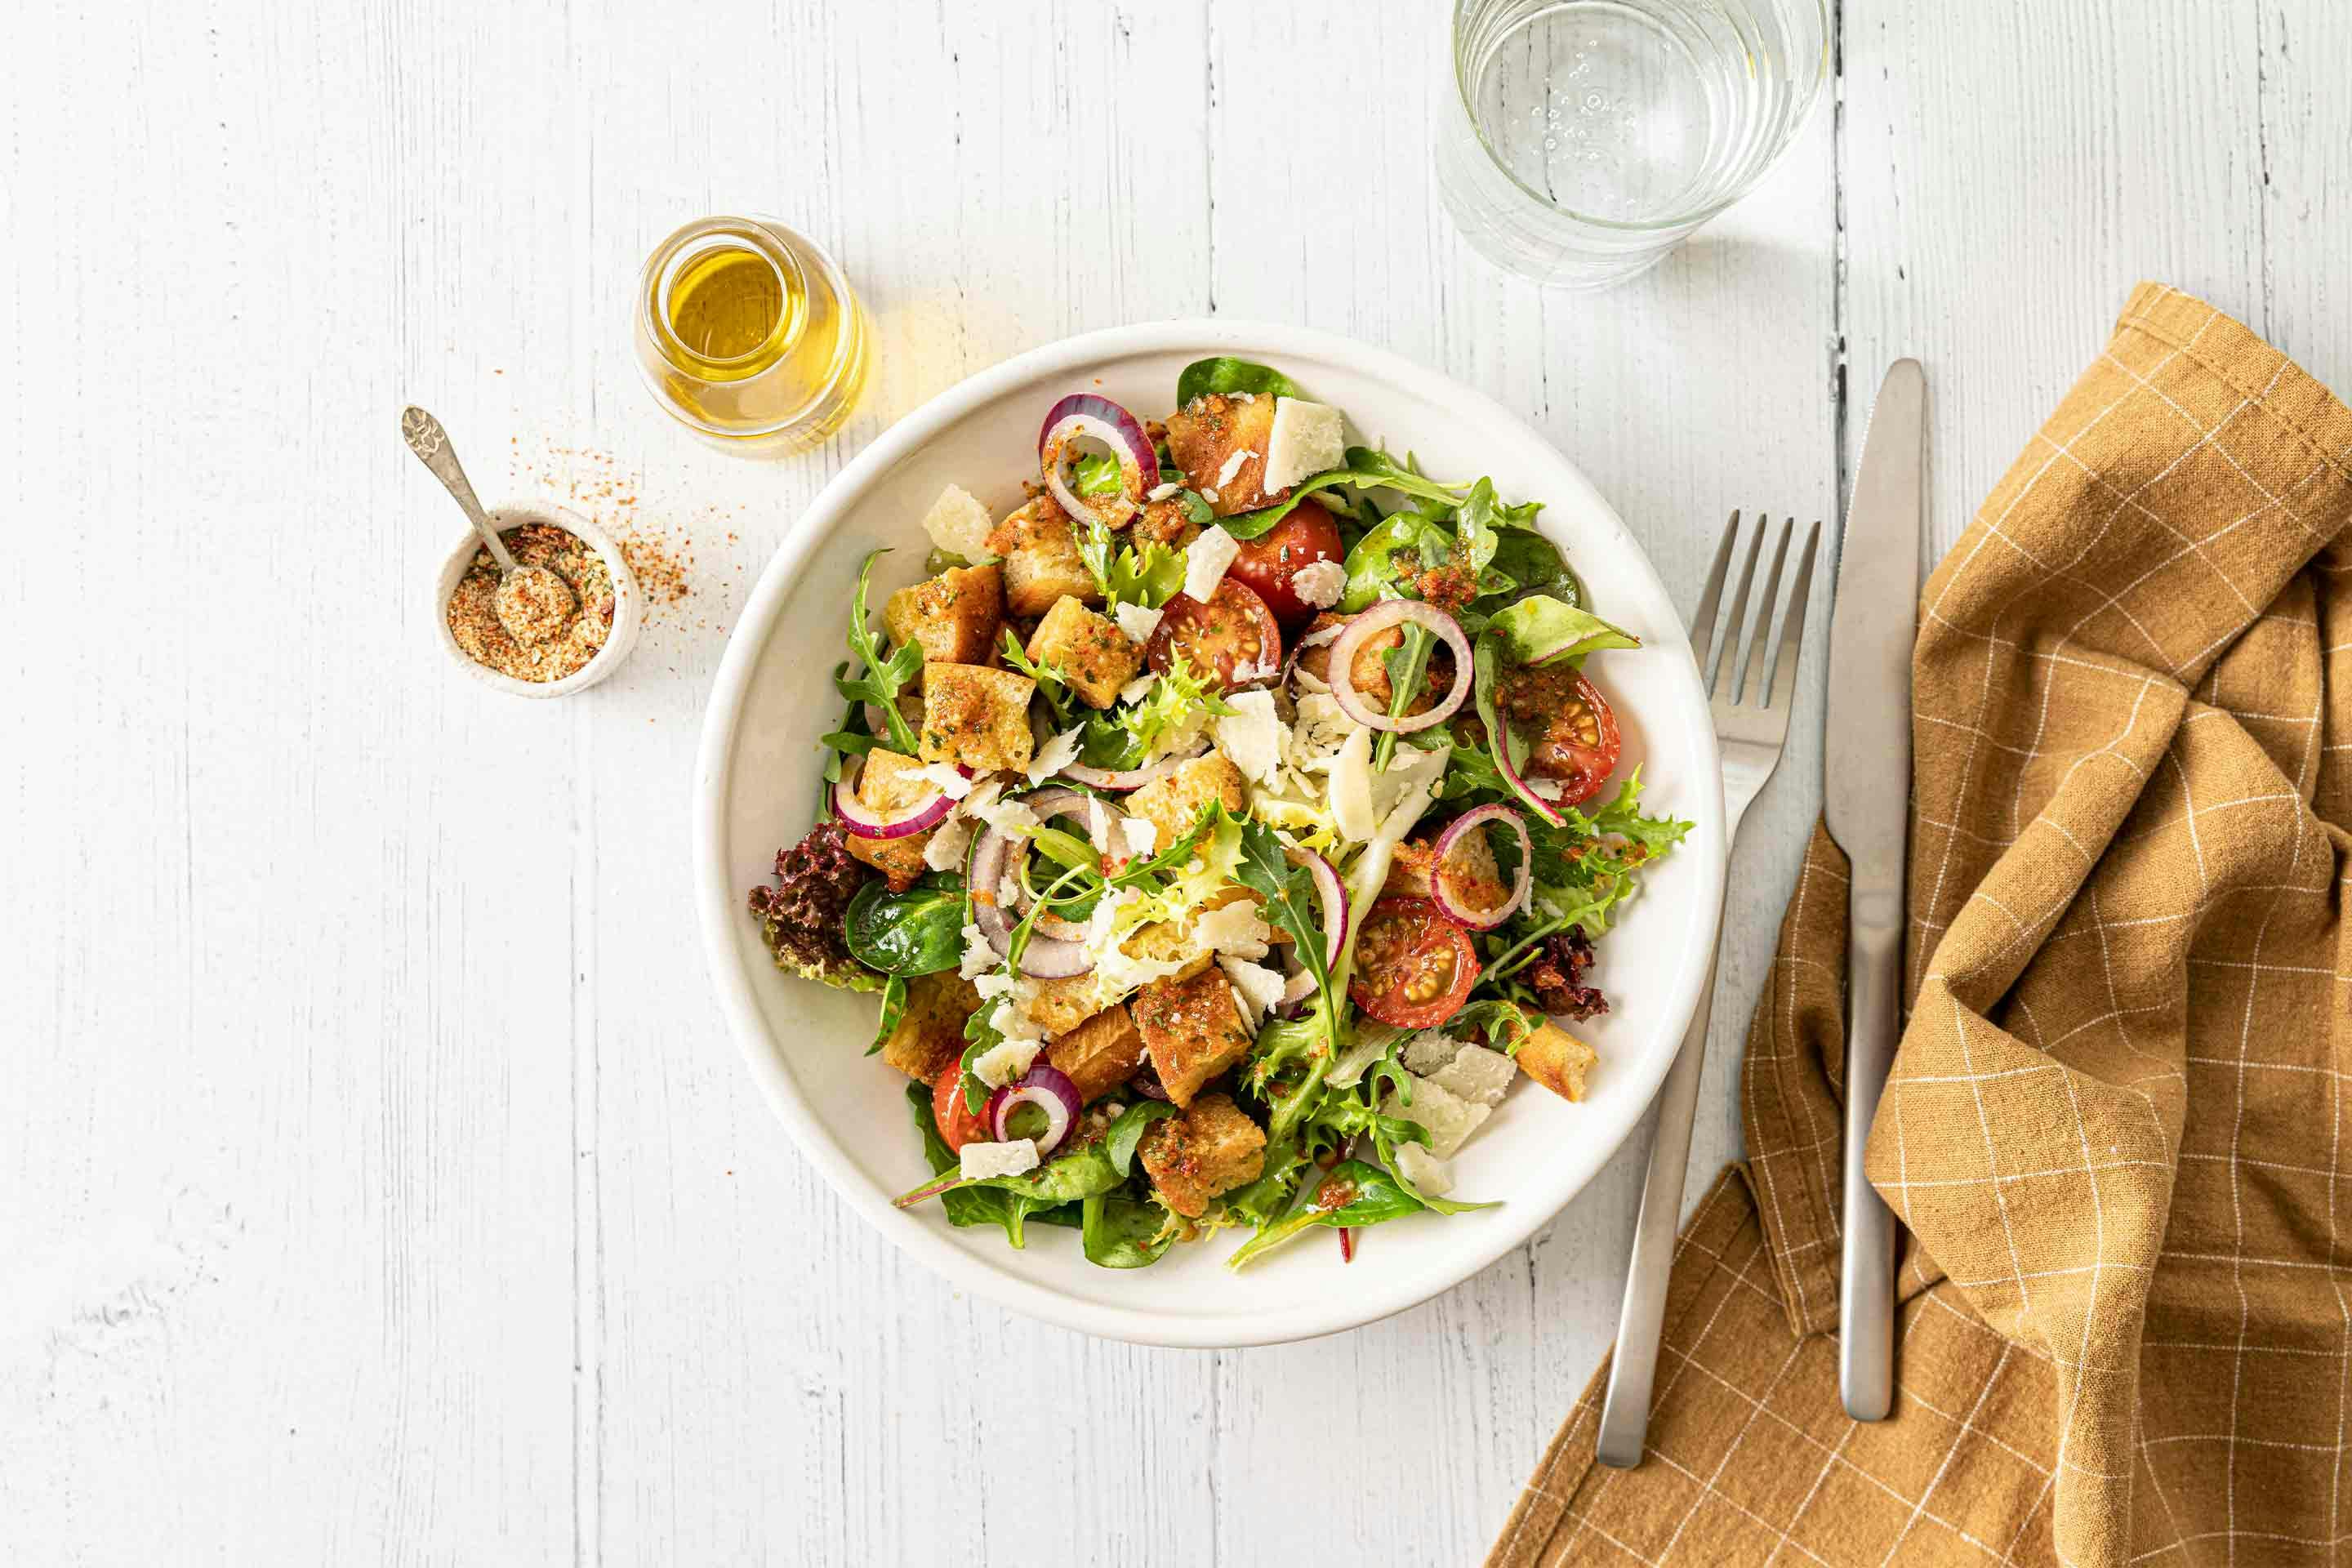 Crispy ciabatta is the perfect addition to this tasty summer salad.